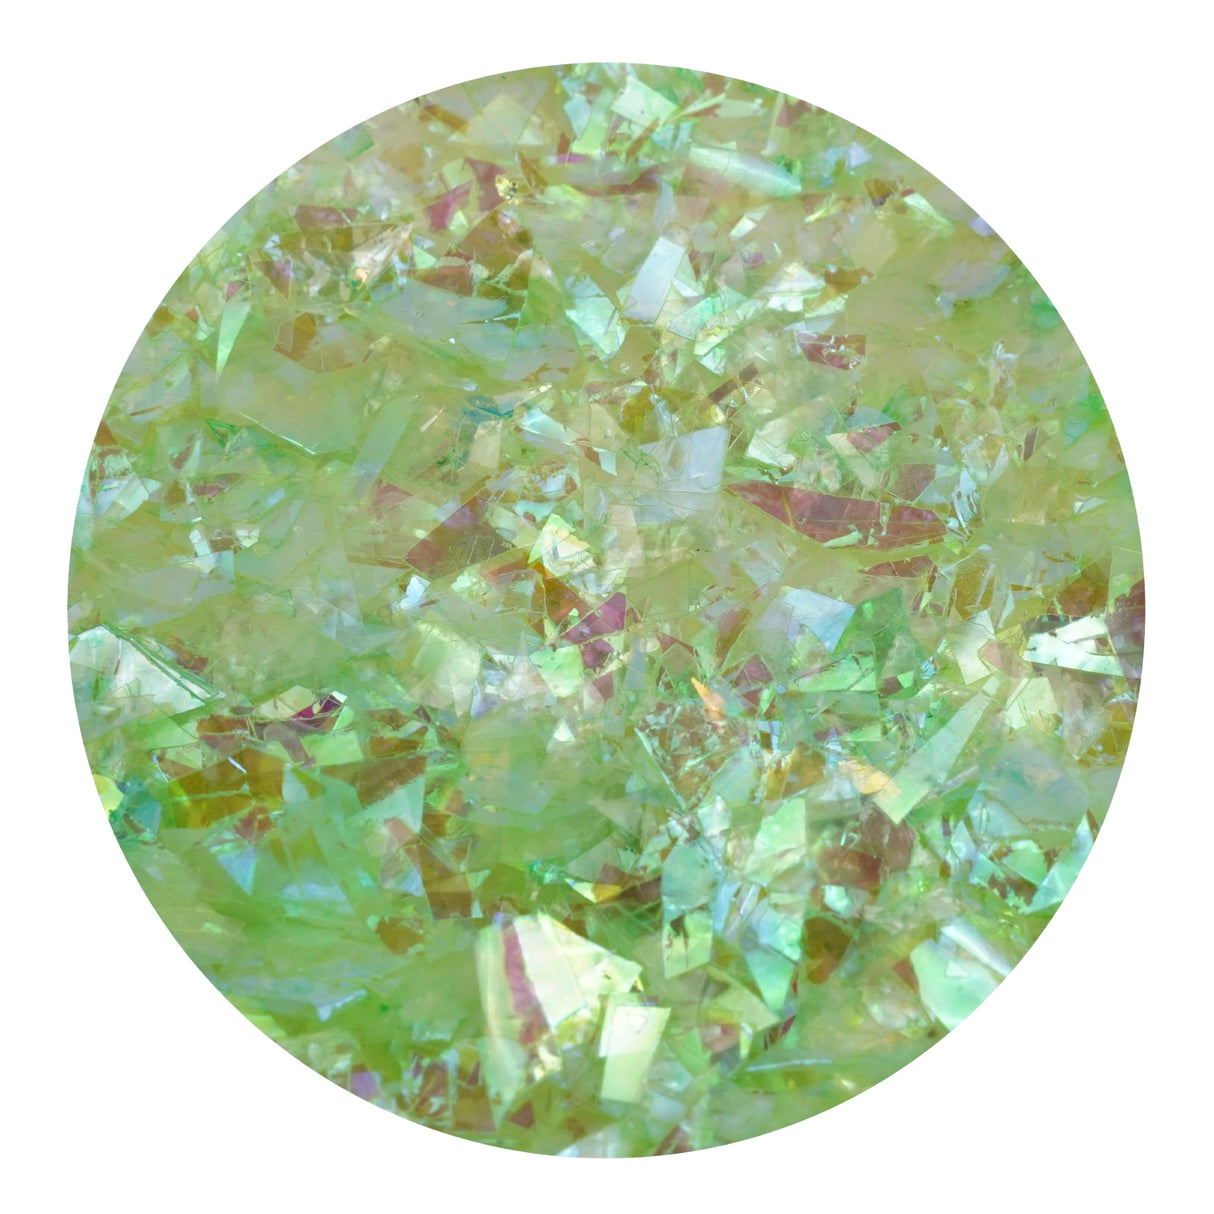 Iridescent Fractured Flakes - Green